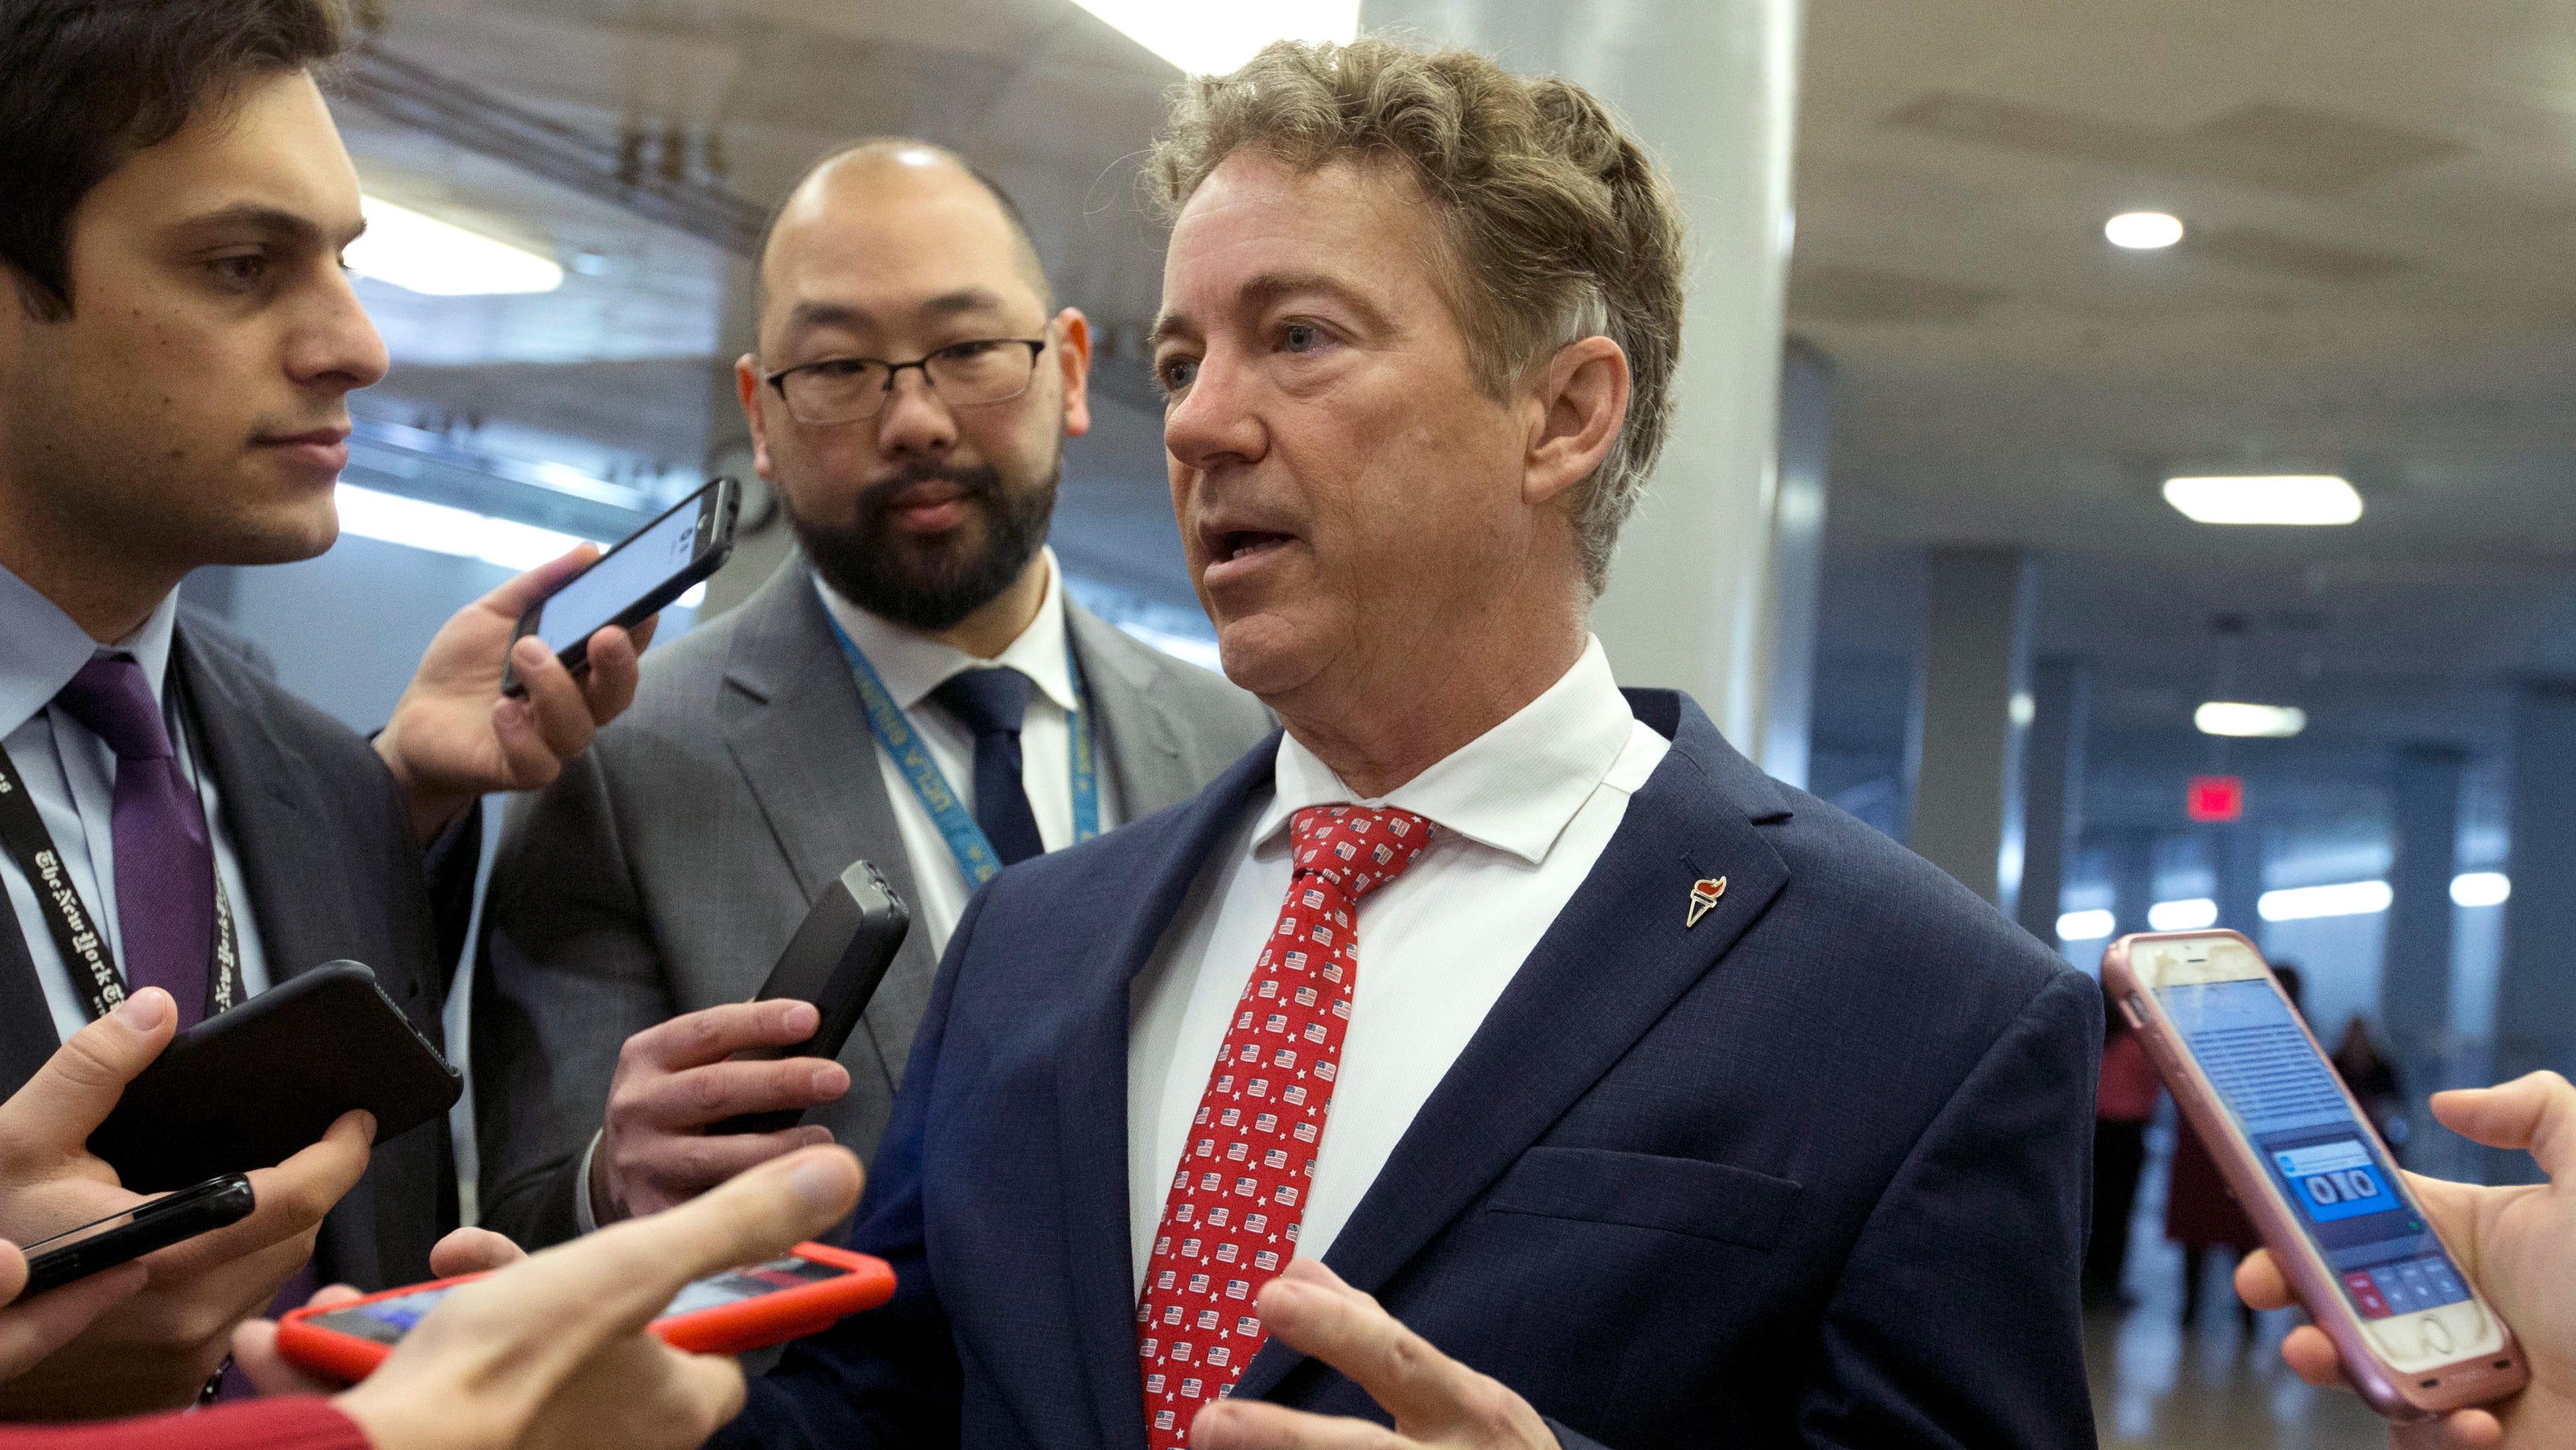 Rand Paul works on crossword puzzle during Trump impeachment trial